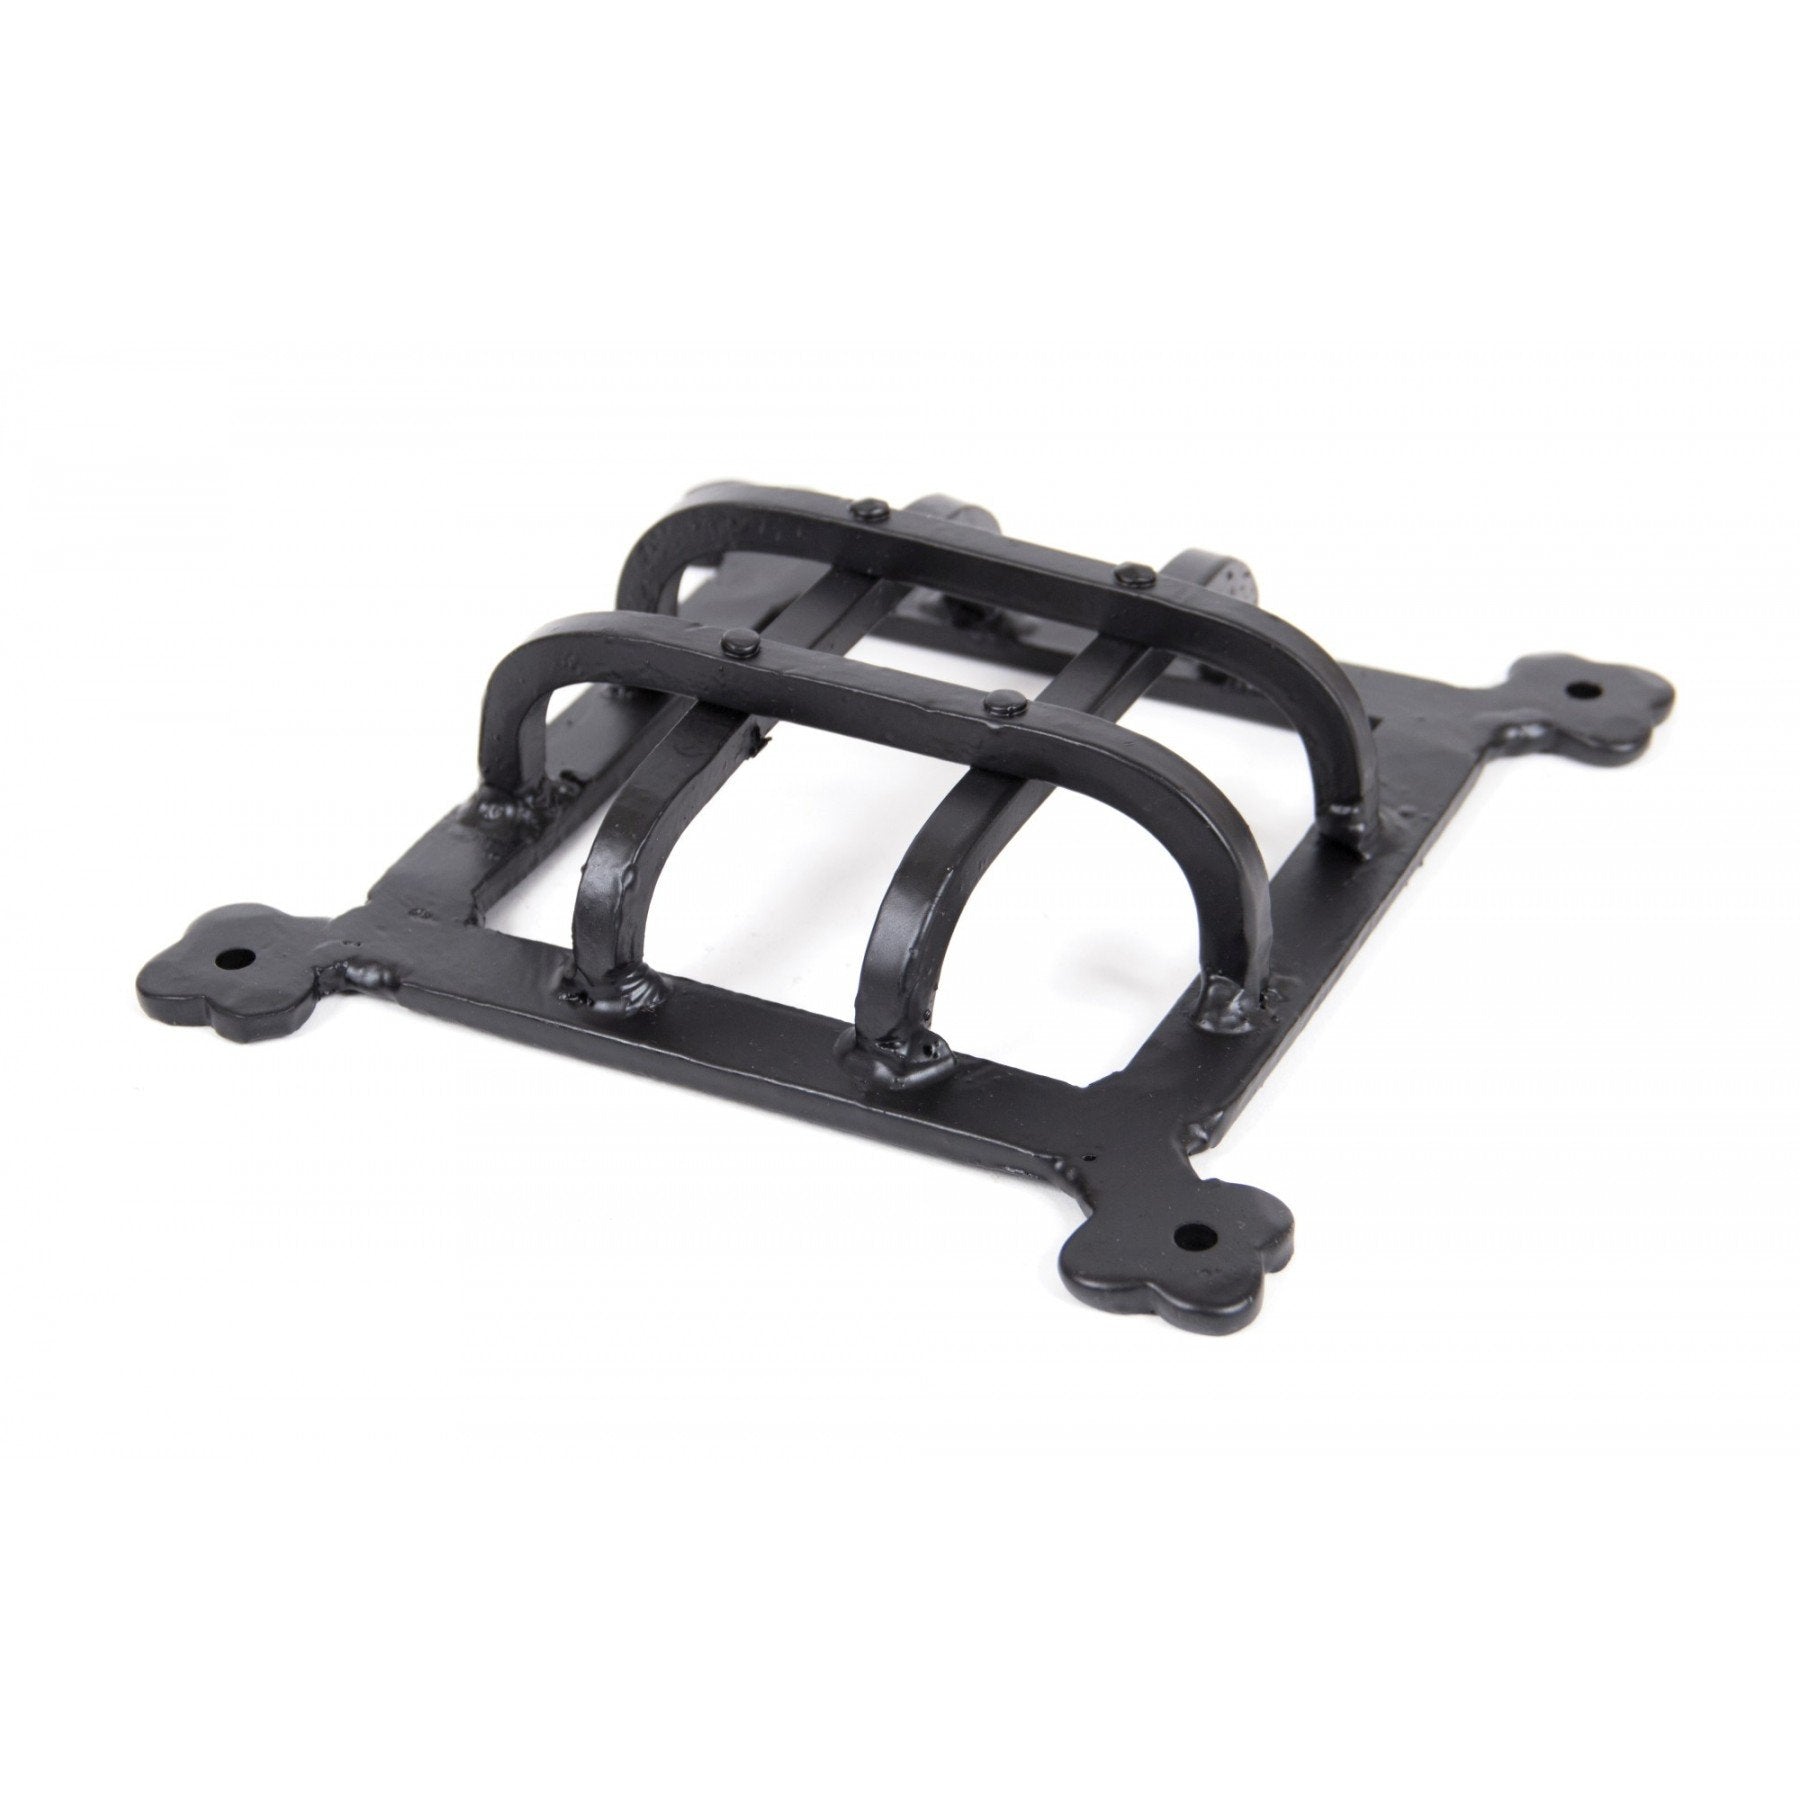 From the Anvil Black Raised Door Grill